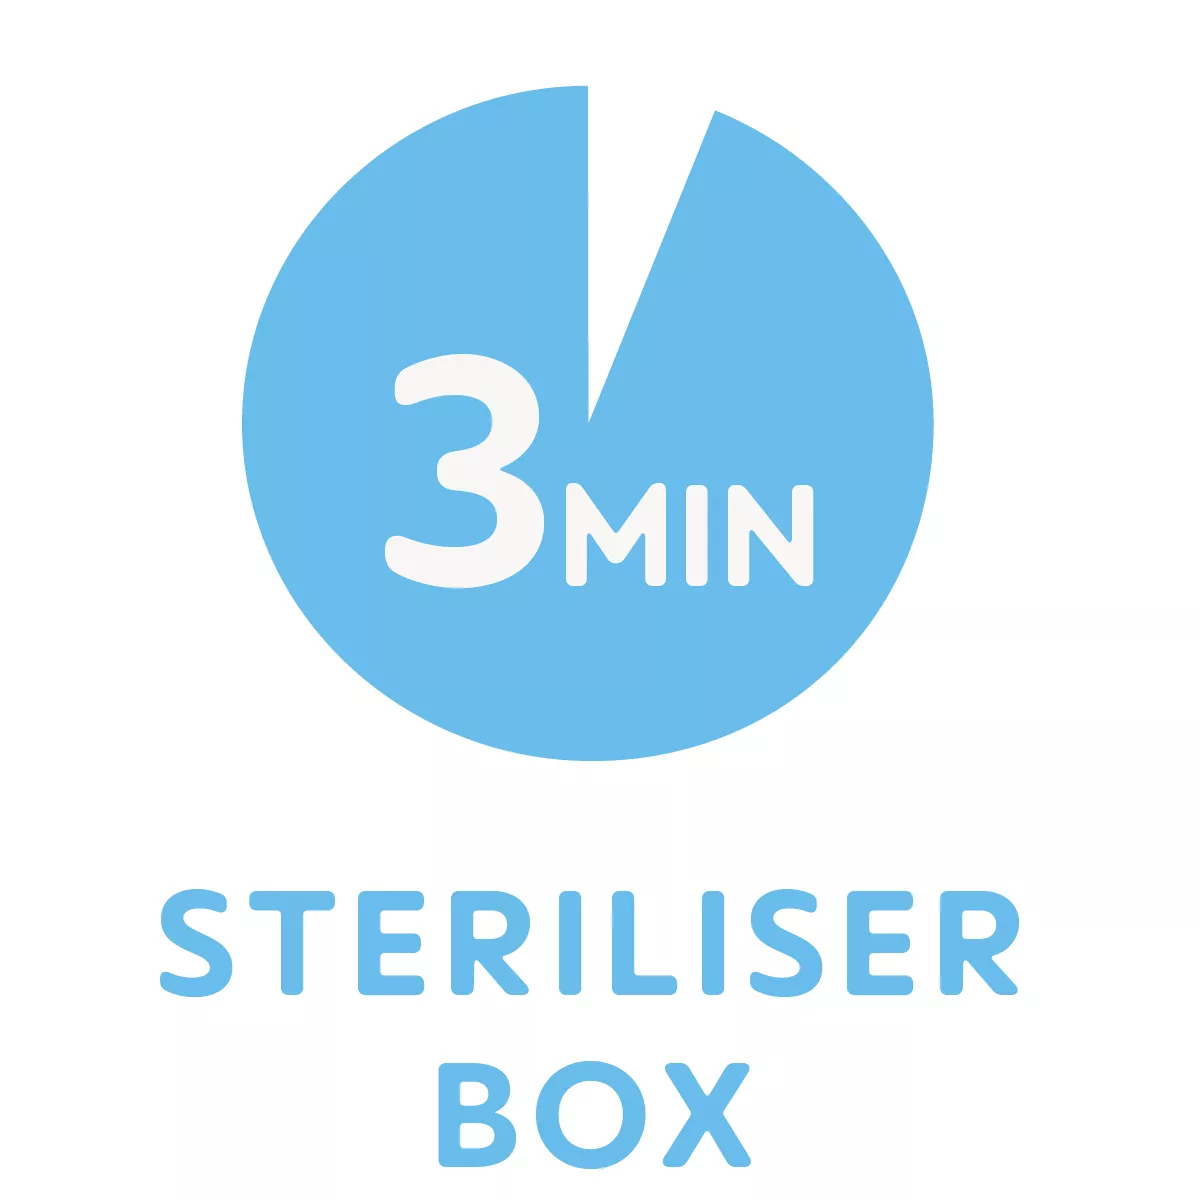 This product comes in a sterilizing & carry box - for convenient and time-saving sterilizing in the microwave